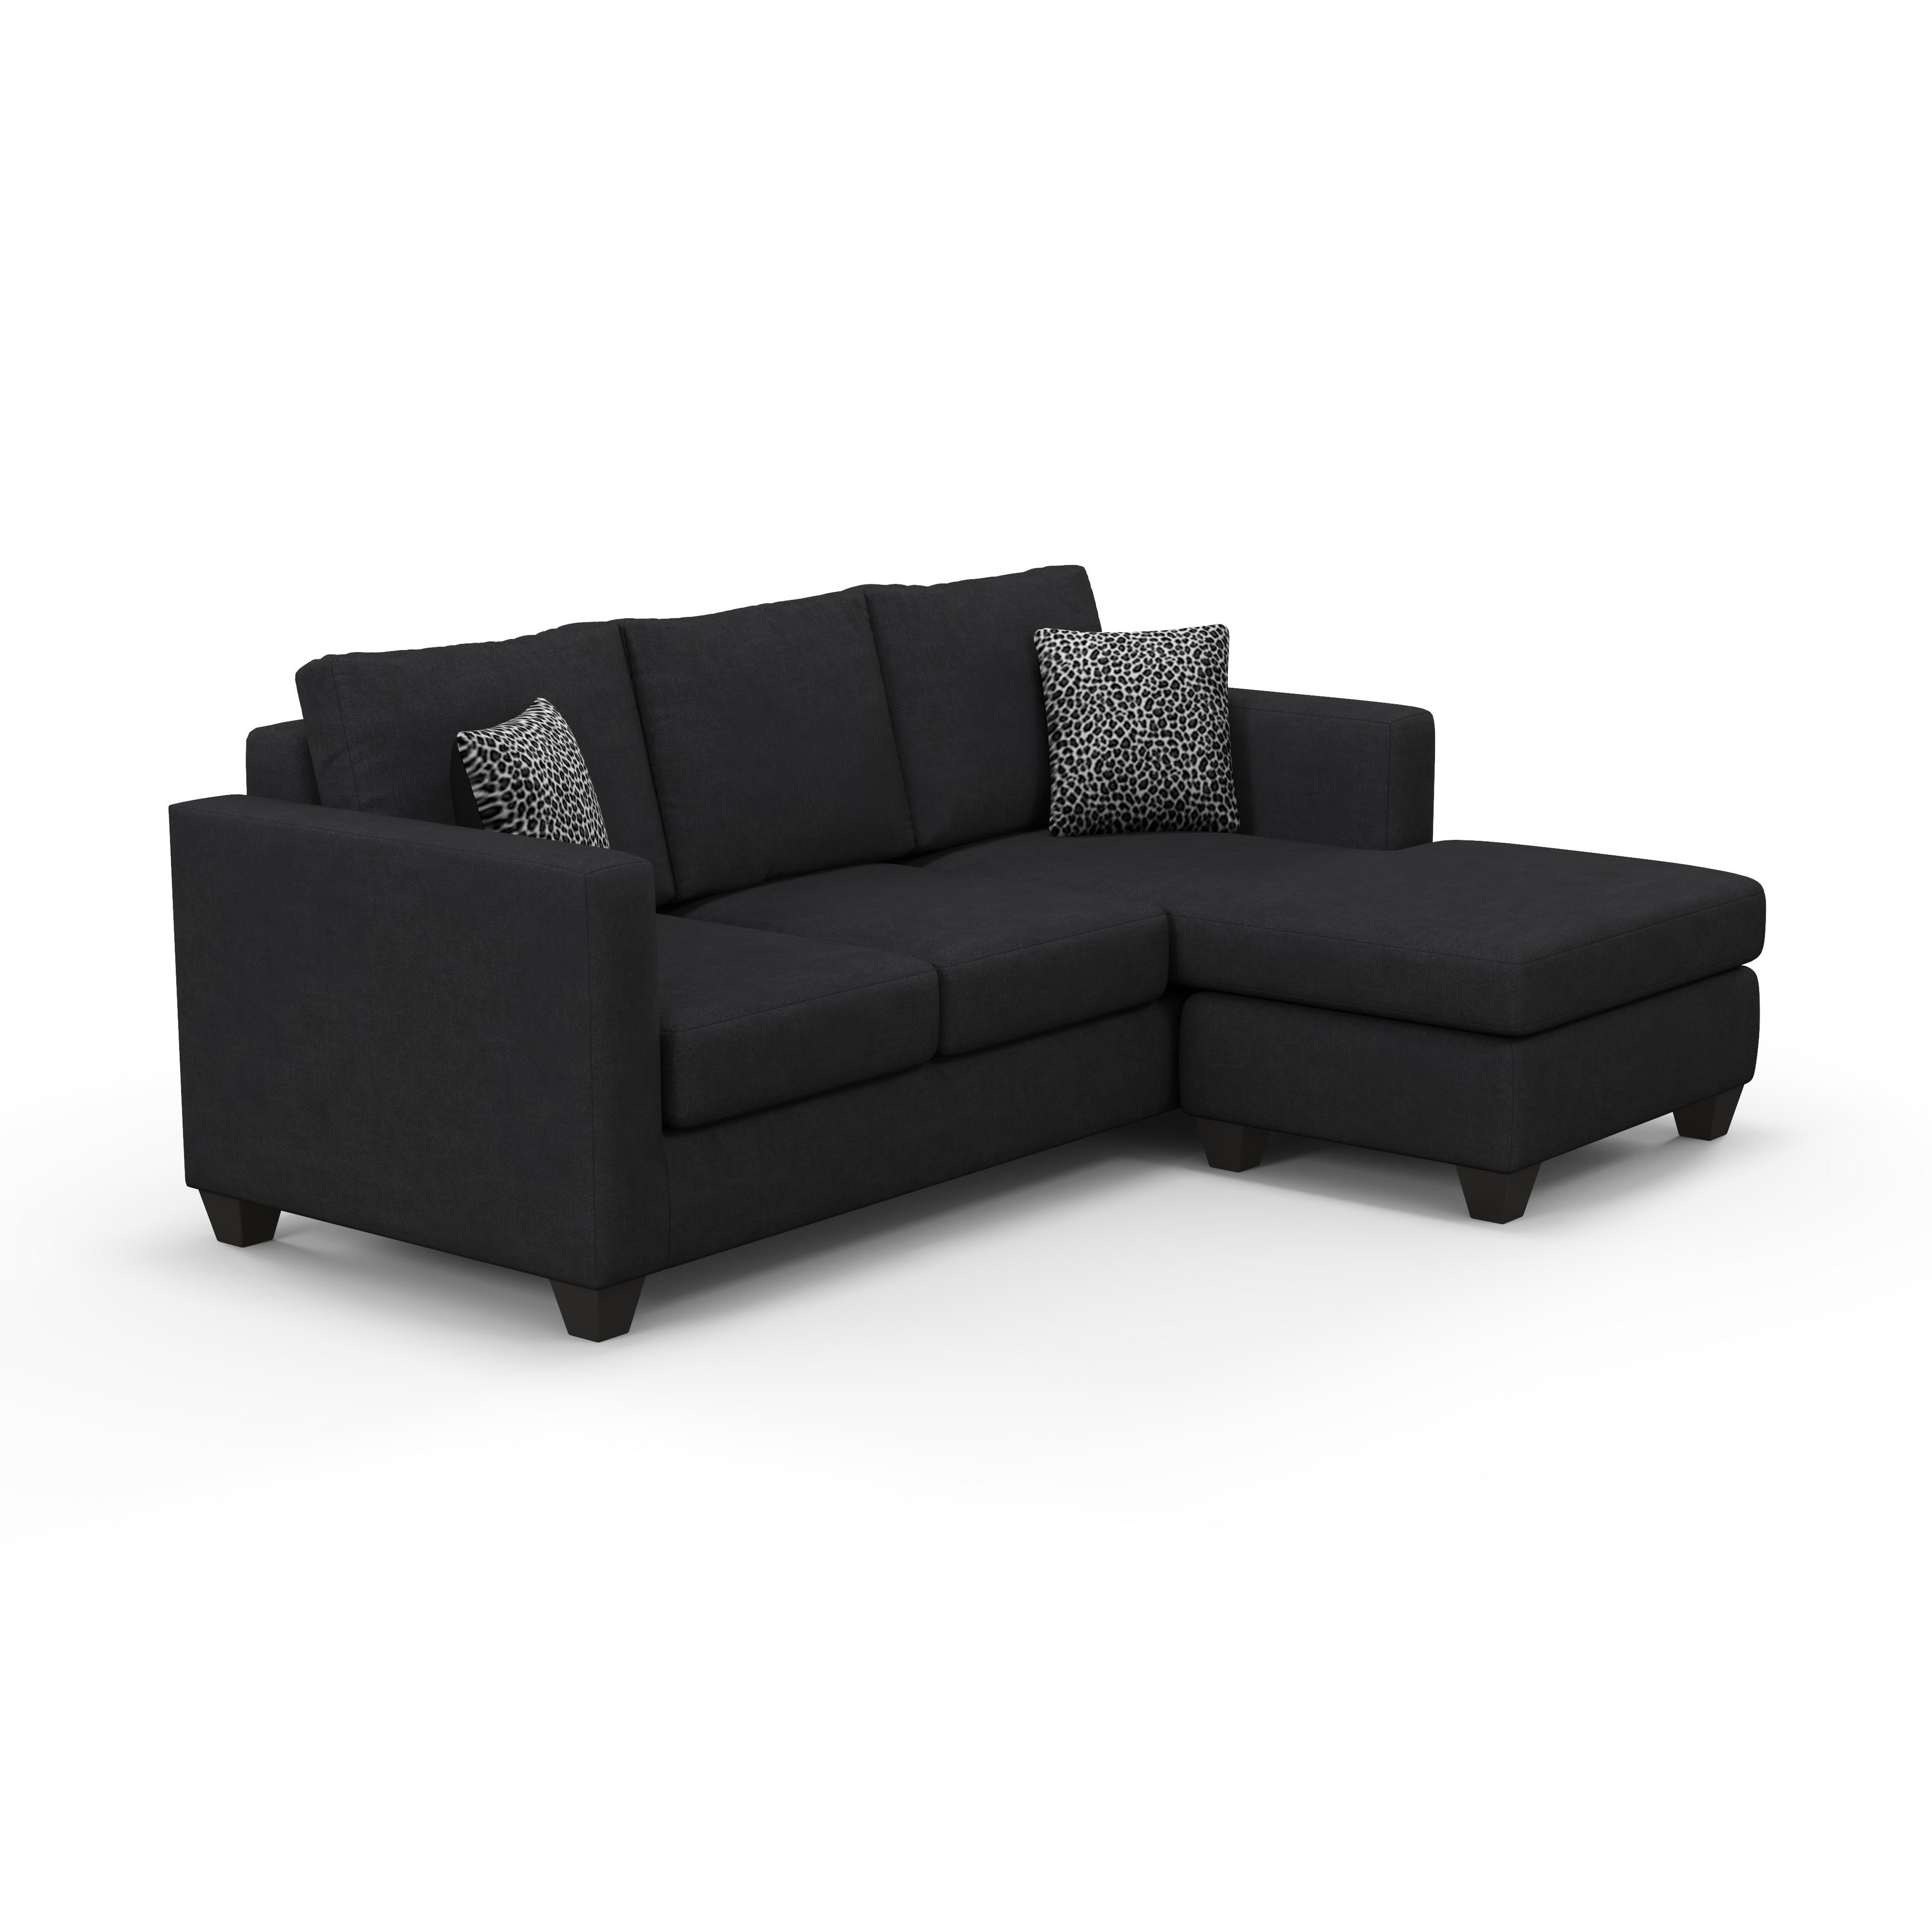 Asher Black 2-Piece Sofa Chaise With Reversible Ottoman